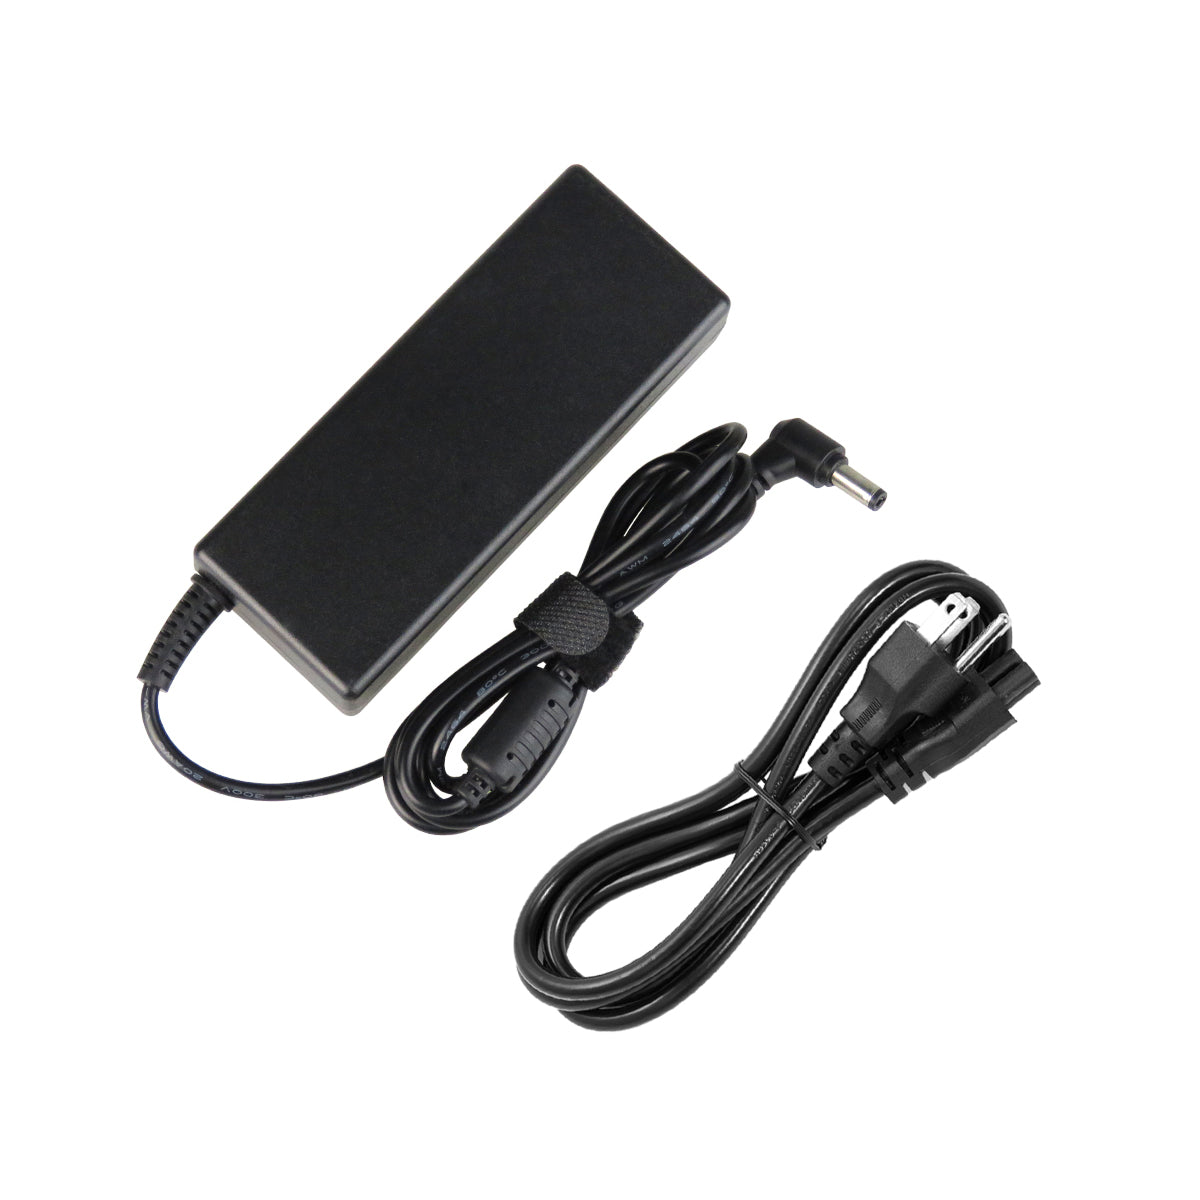 AC Adapter Charger for ASUS N46VJ Notebook.